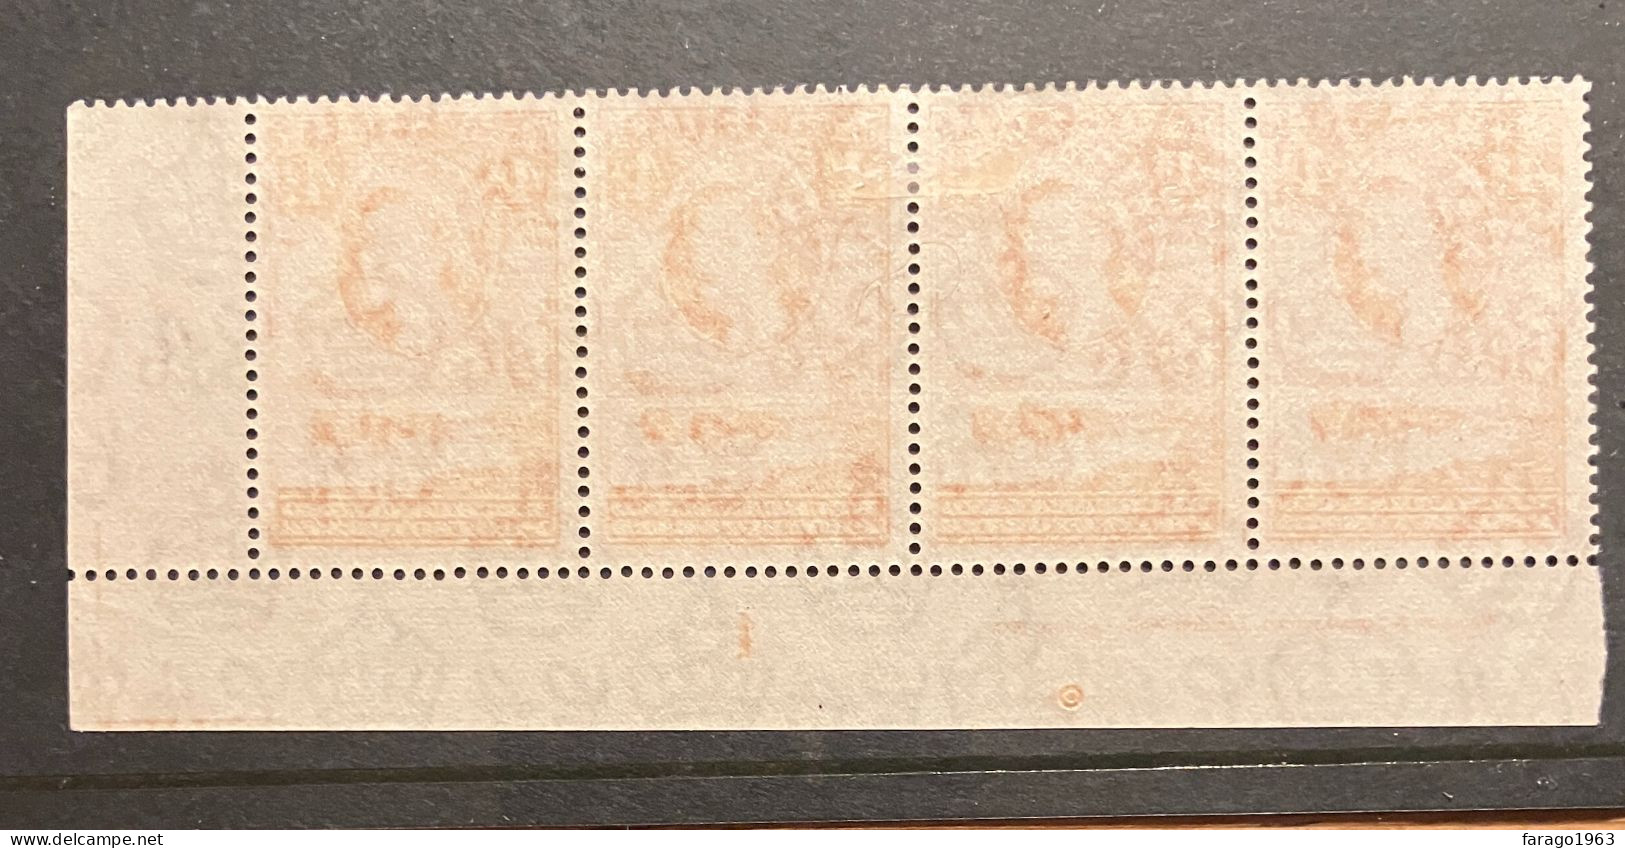 1958 Bechuanaland New 4d Red-orange SG146b In LR Corner Strip Of 4 DISPLAY PIECE  (see Description) - 1885-1964 Bechuanaland Protectorate